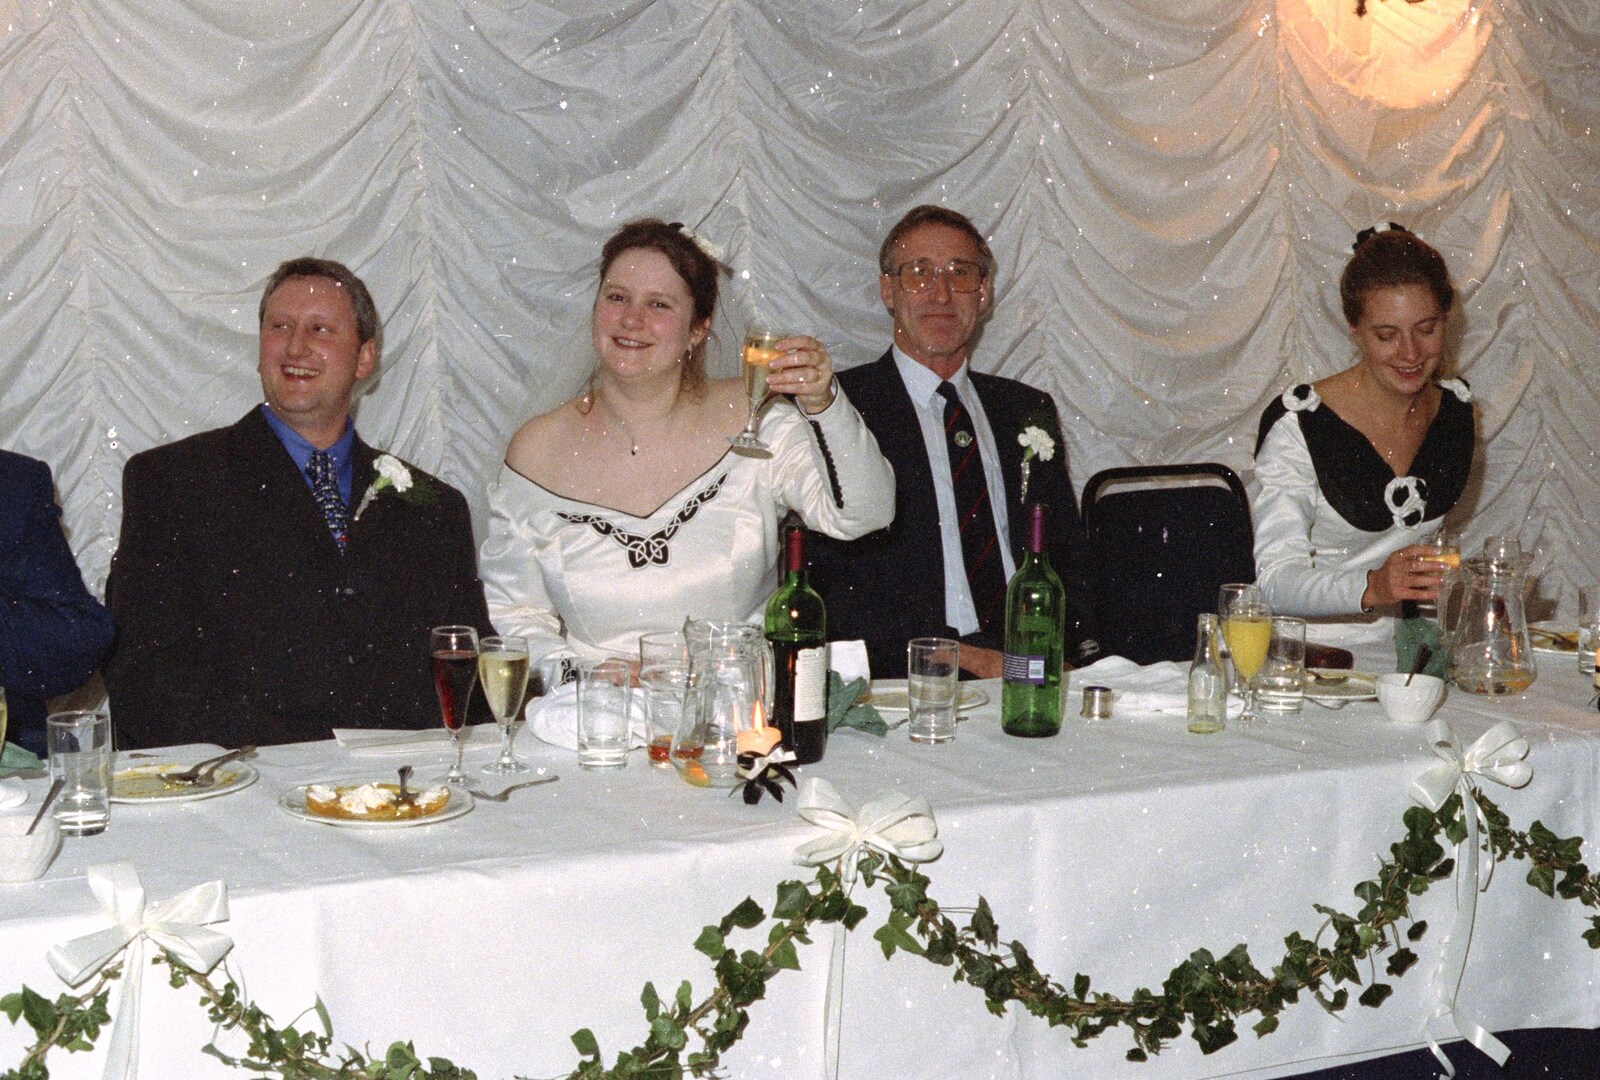 A toast from The Brome Swan at Graham and Pauline's Wedding, Gissing Hall, Norfolk - 28th April 1997